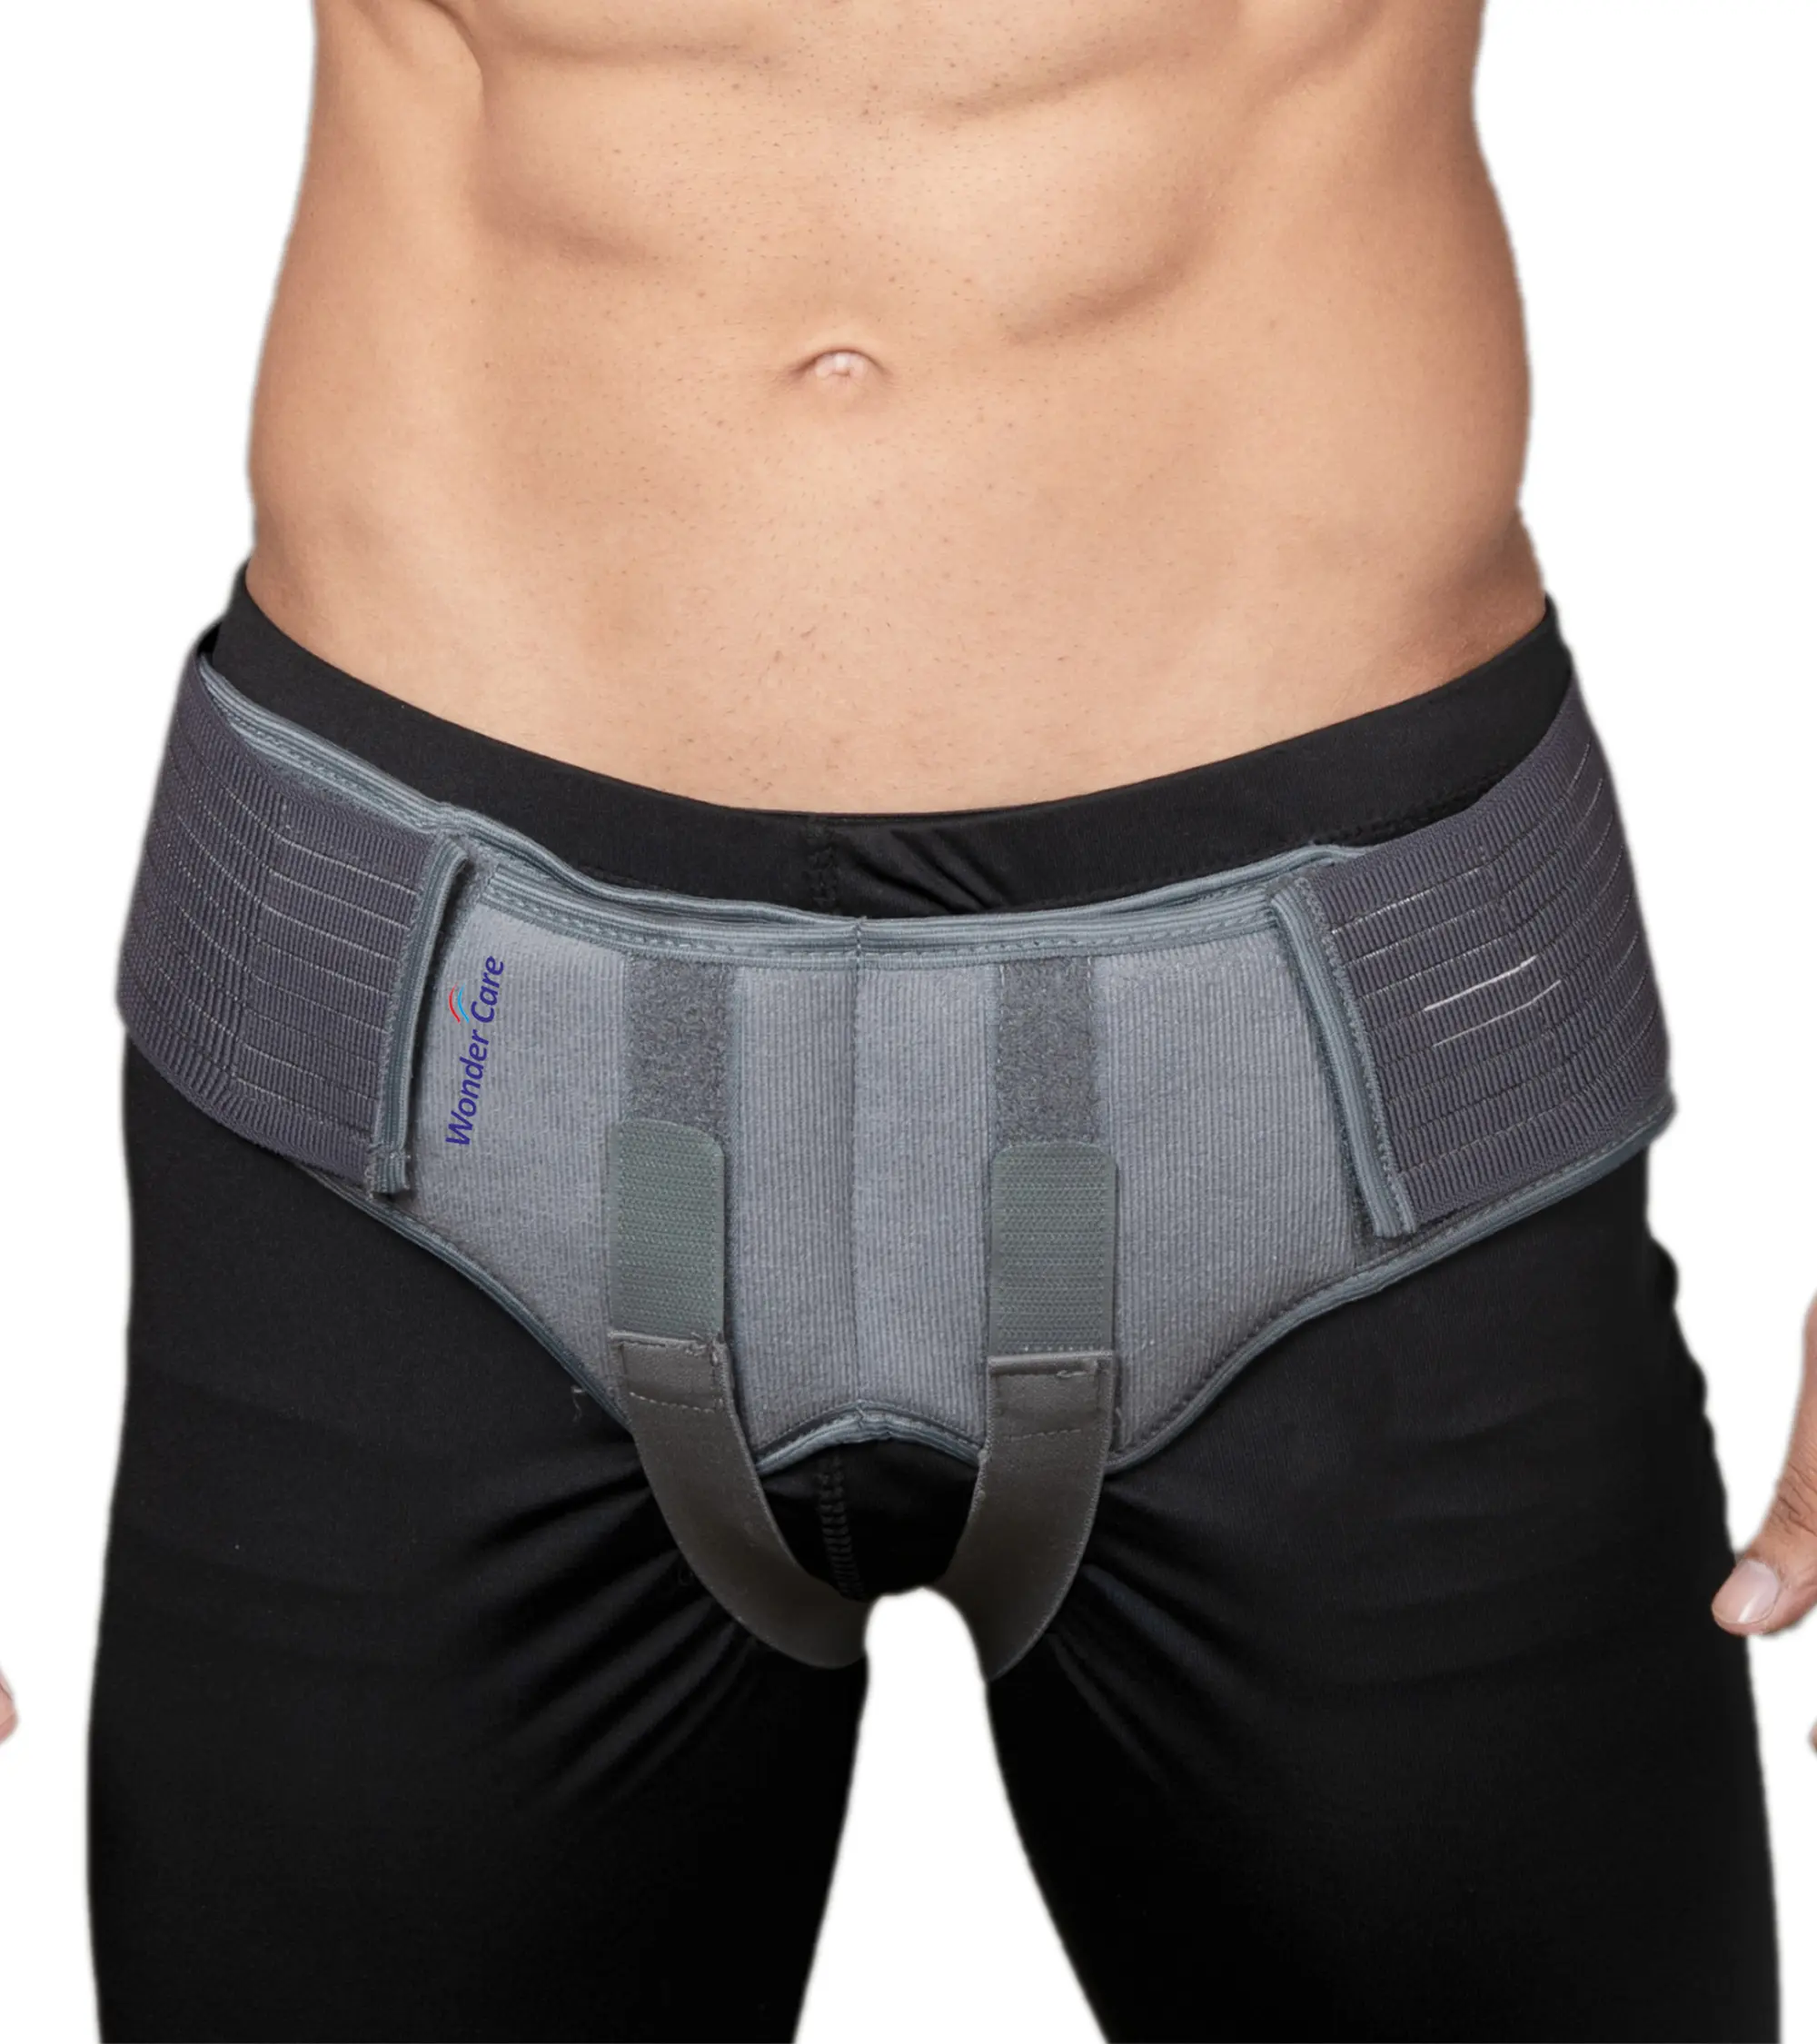 Buy Hernia Support Belt Groin Truss Brace Post Surgery Hernia Pain Relief with Compression Pressure Foam Pads For Sale Grey trus